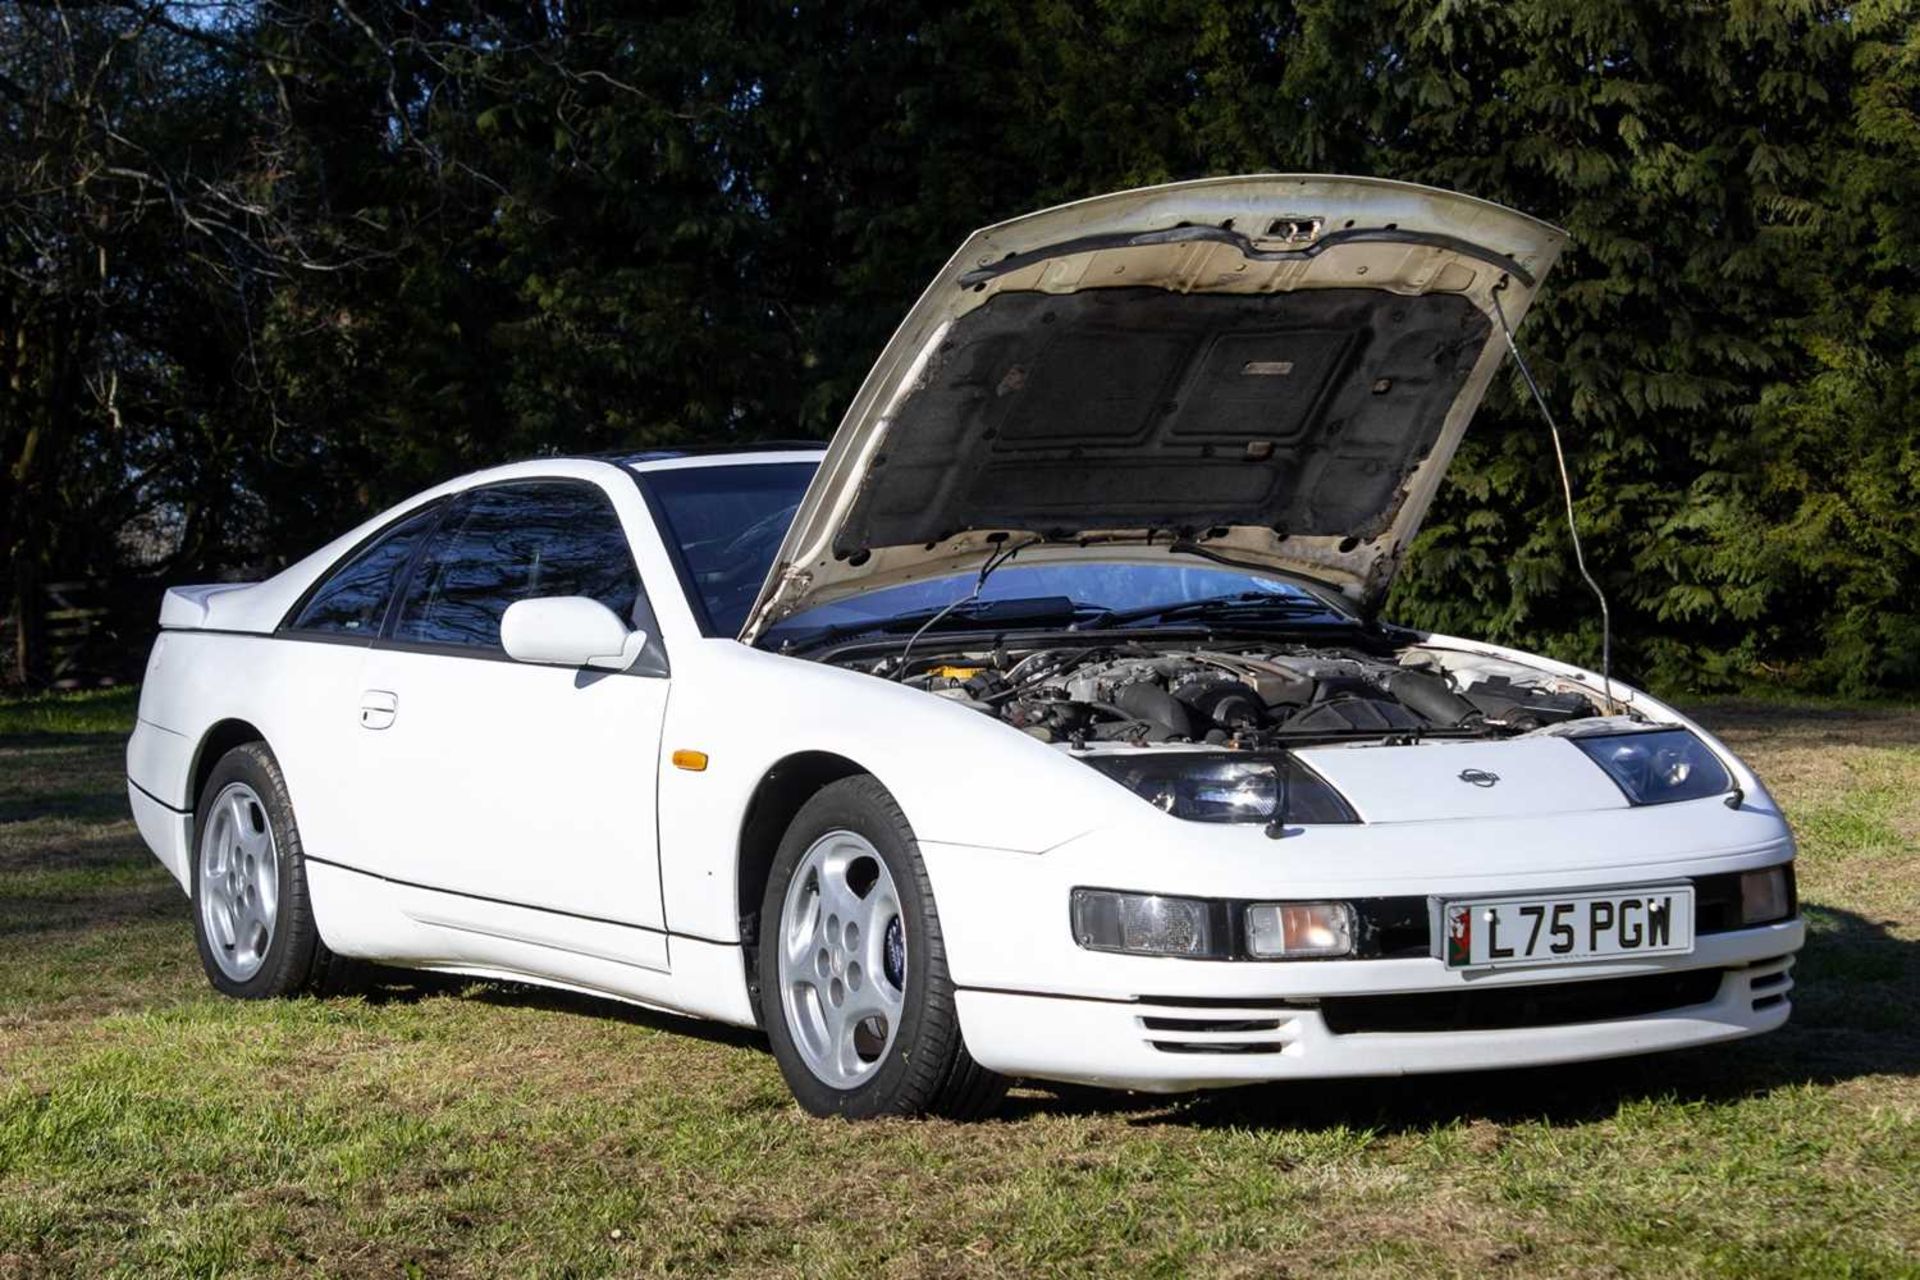 1990 Nissan 300ZX Turbo 2+2 Targa One of the last examples registered in the UK - Image 50 of 89